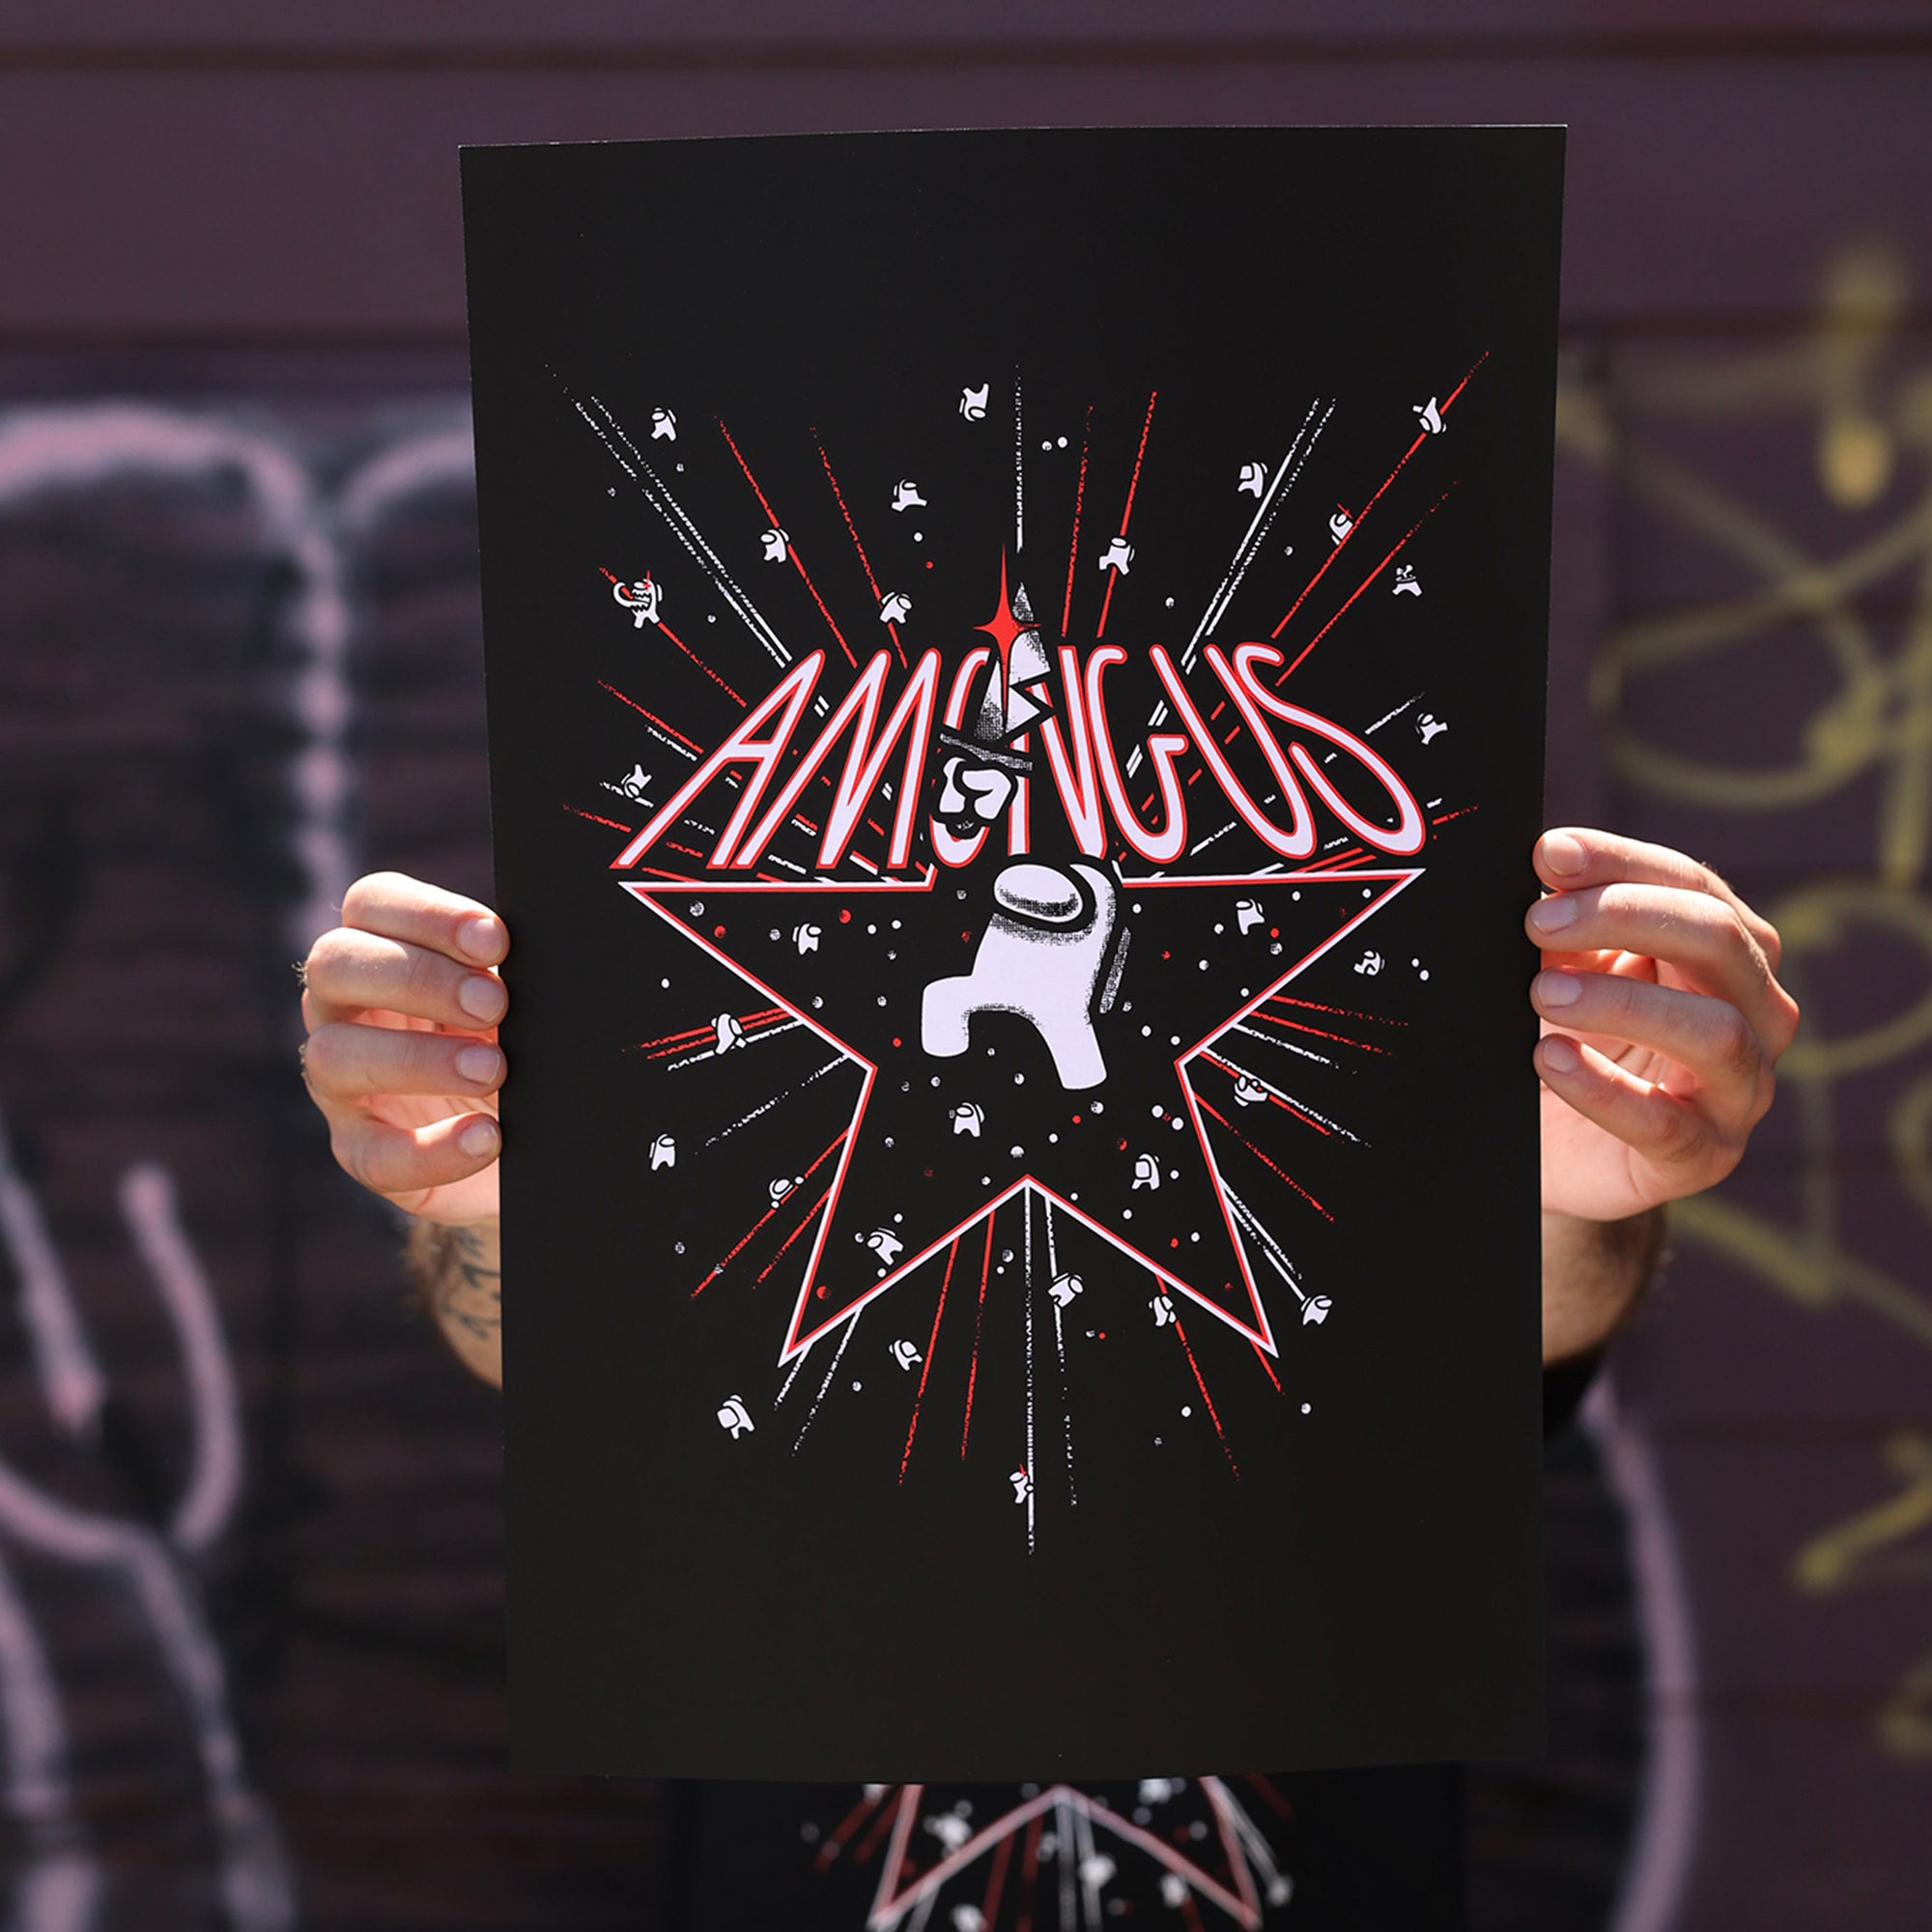 A close up photograph of a model’s hands holding up the Among Us: 5th Anniversary Print  by Amy Liu. The print depicts a white Impostor among a flurry of stars and fireworks. The impostor stands in the middle of a red outlined star holding a bloody knife over their head. “Among Us” text is written in red and white sitting on top of the outlined star. 